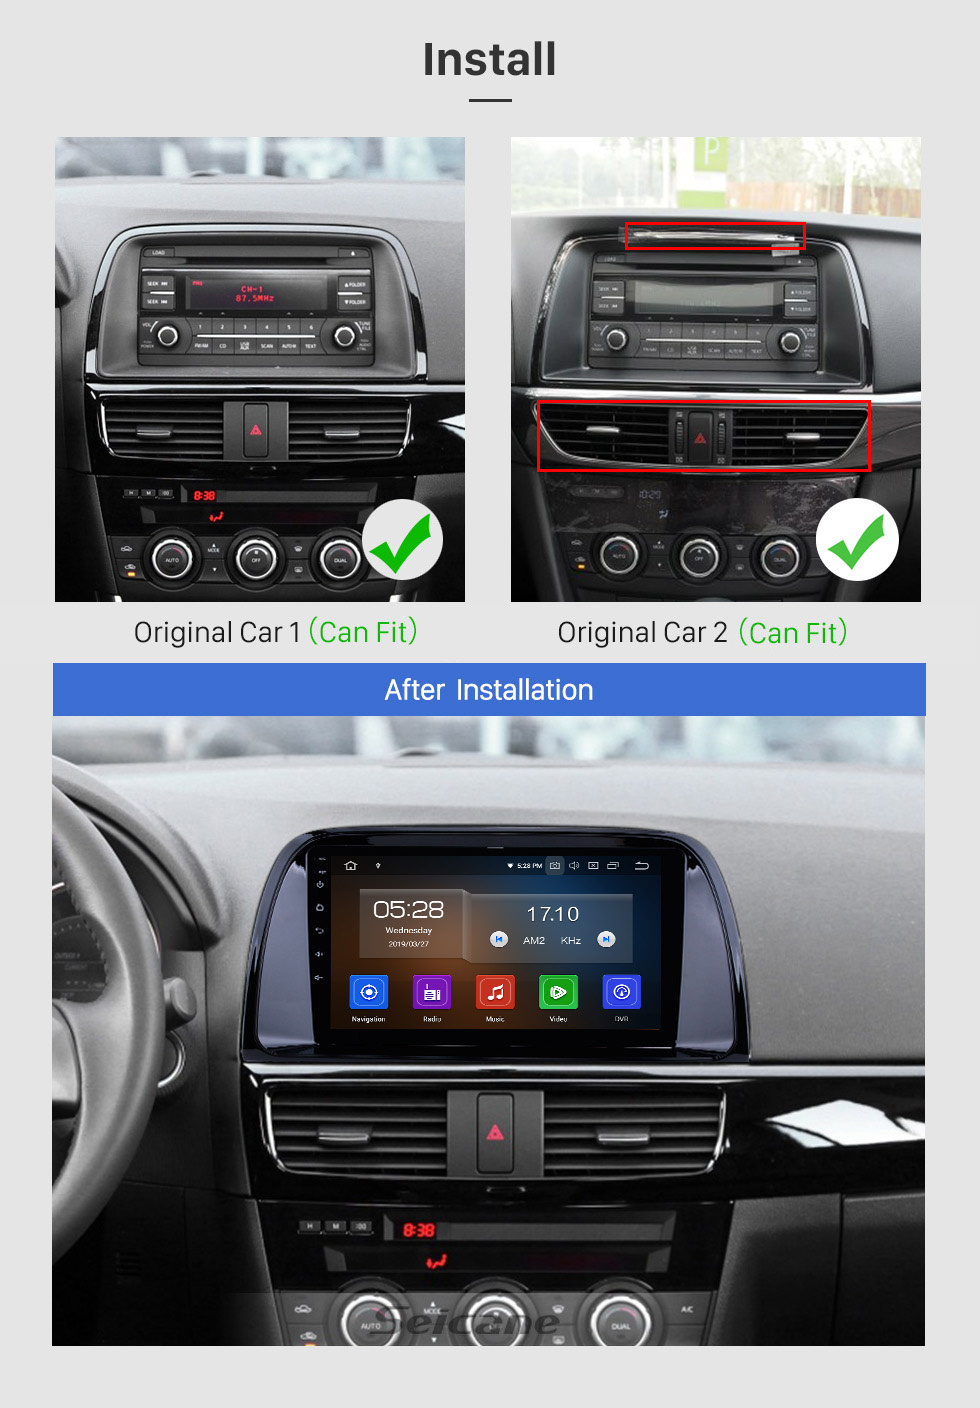 Seicane 9 Inch OEM Android 11.0 Radio GPS Navigation system For 2012 2013 2014 2015 MAZDA CX-5 with Bluetooth Capacitive Touch Screen TPMS DVR OBD II Rear camera AUX  WiFi HD 1080P Video Headrest Monitor Control USB SD 